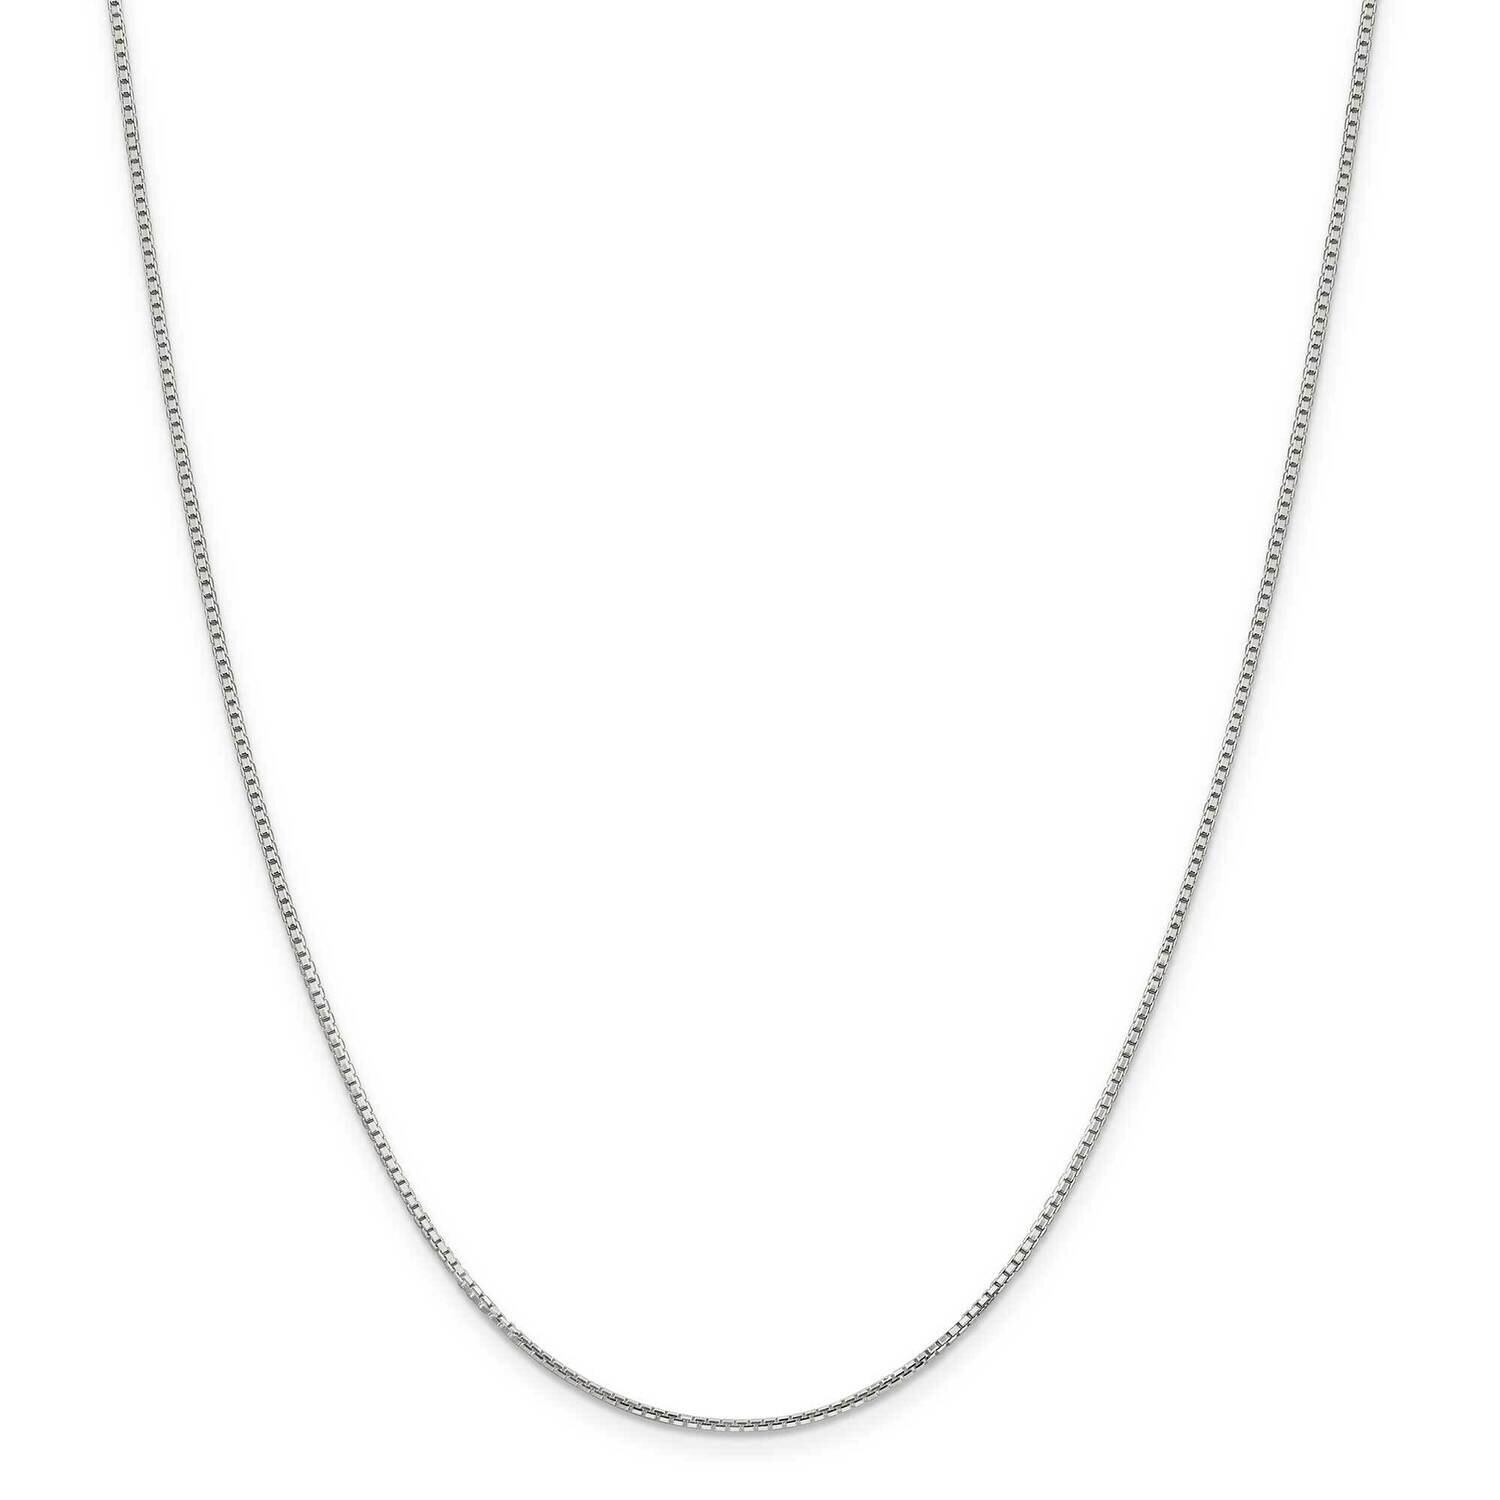 1.25mm 8 Sided Diamond-Cut Box Chain with 4 Inch Extender 22 Inch Sterling Silver QBR024E-22